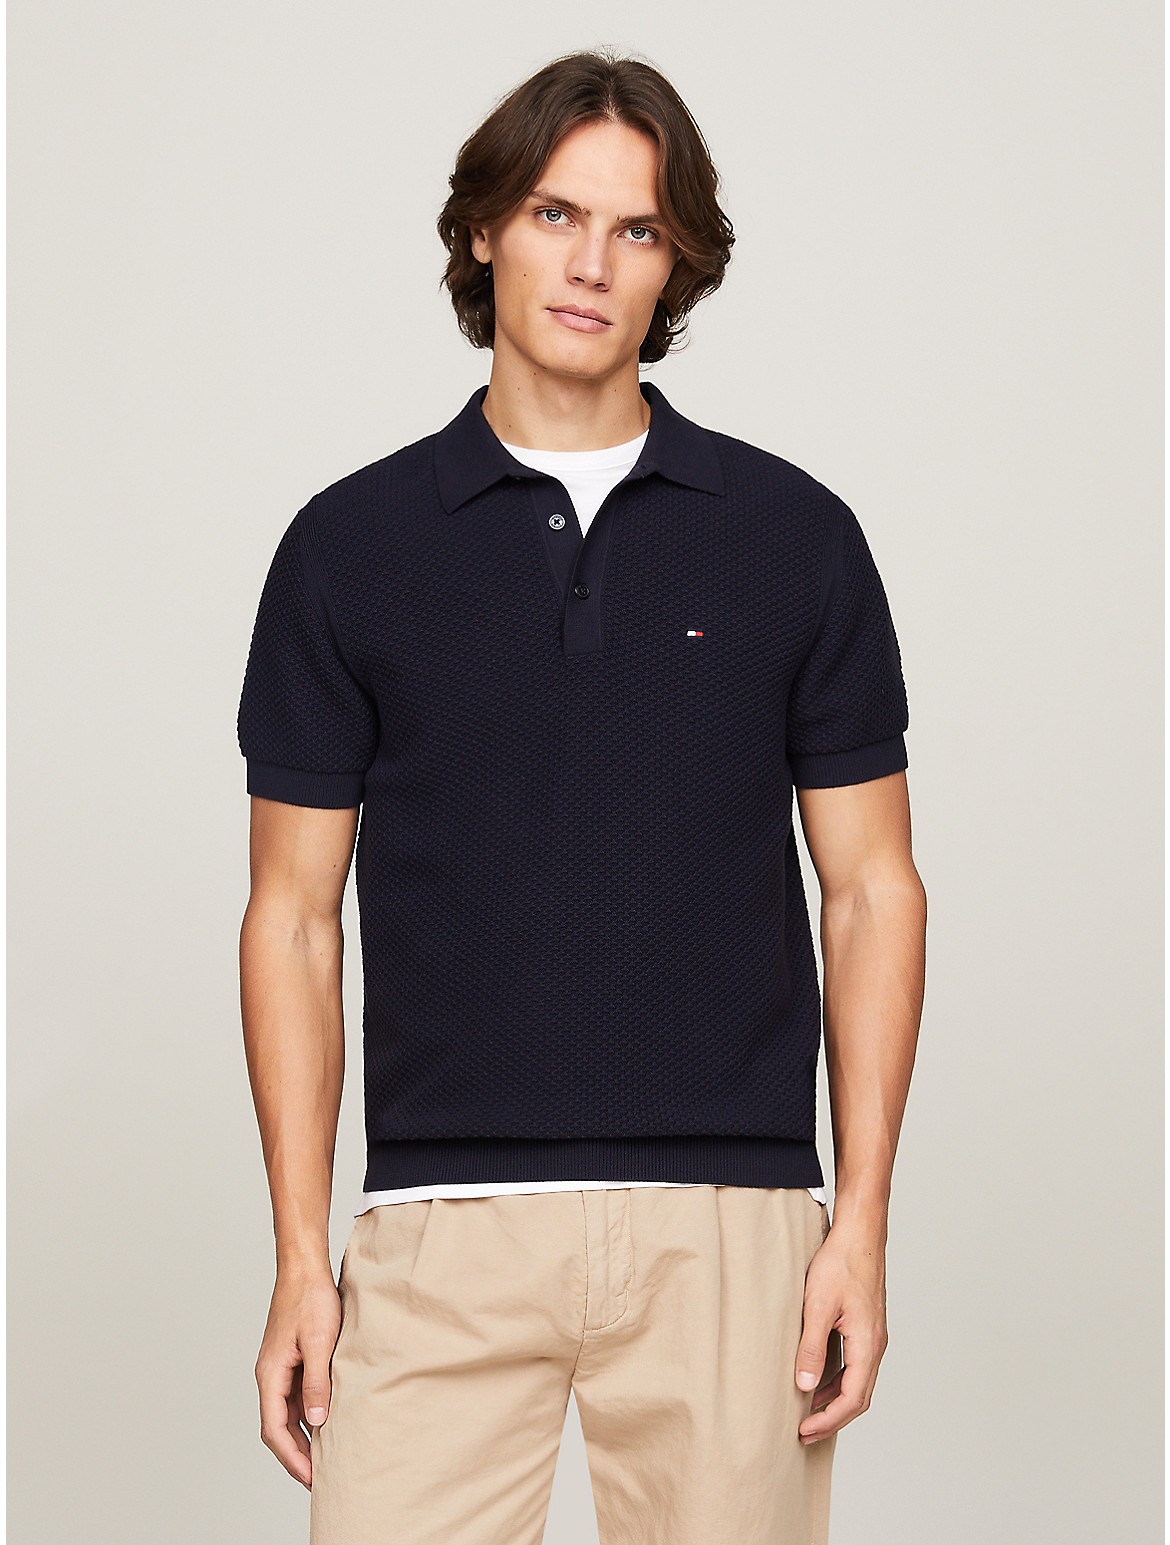 Tommy Hilfiger Men's Textured Knit Polo Sweater